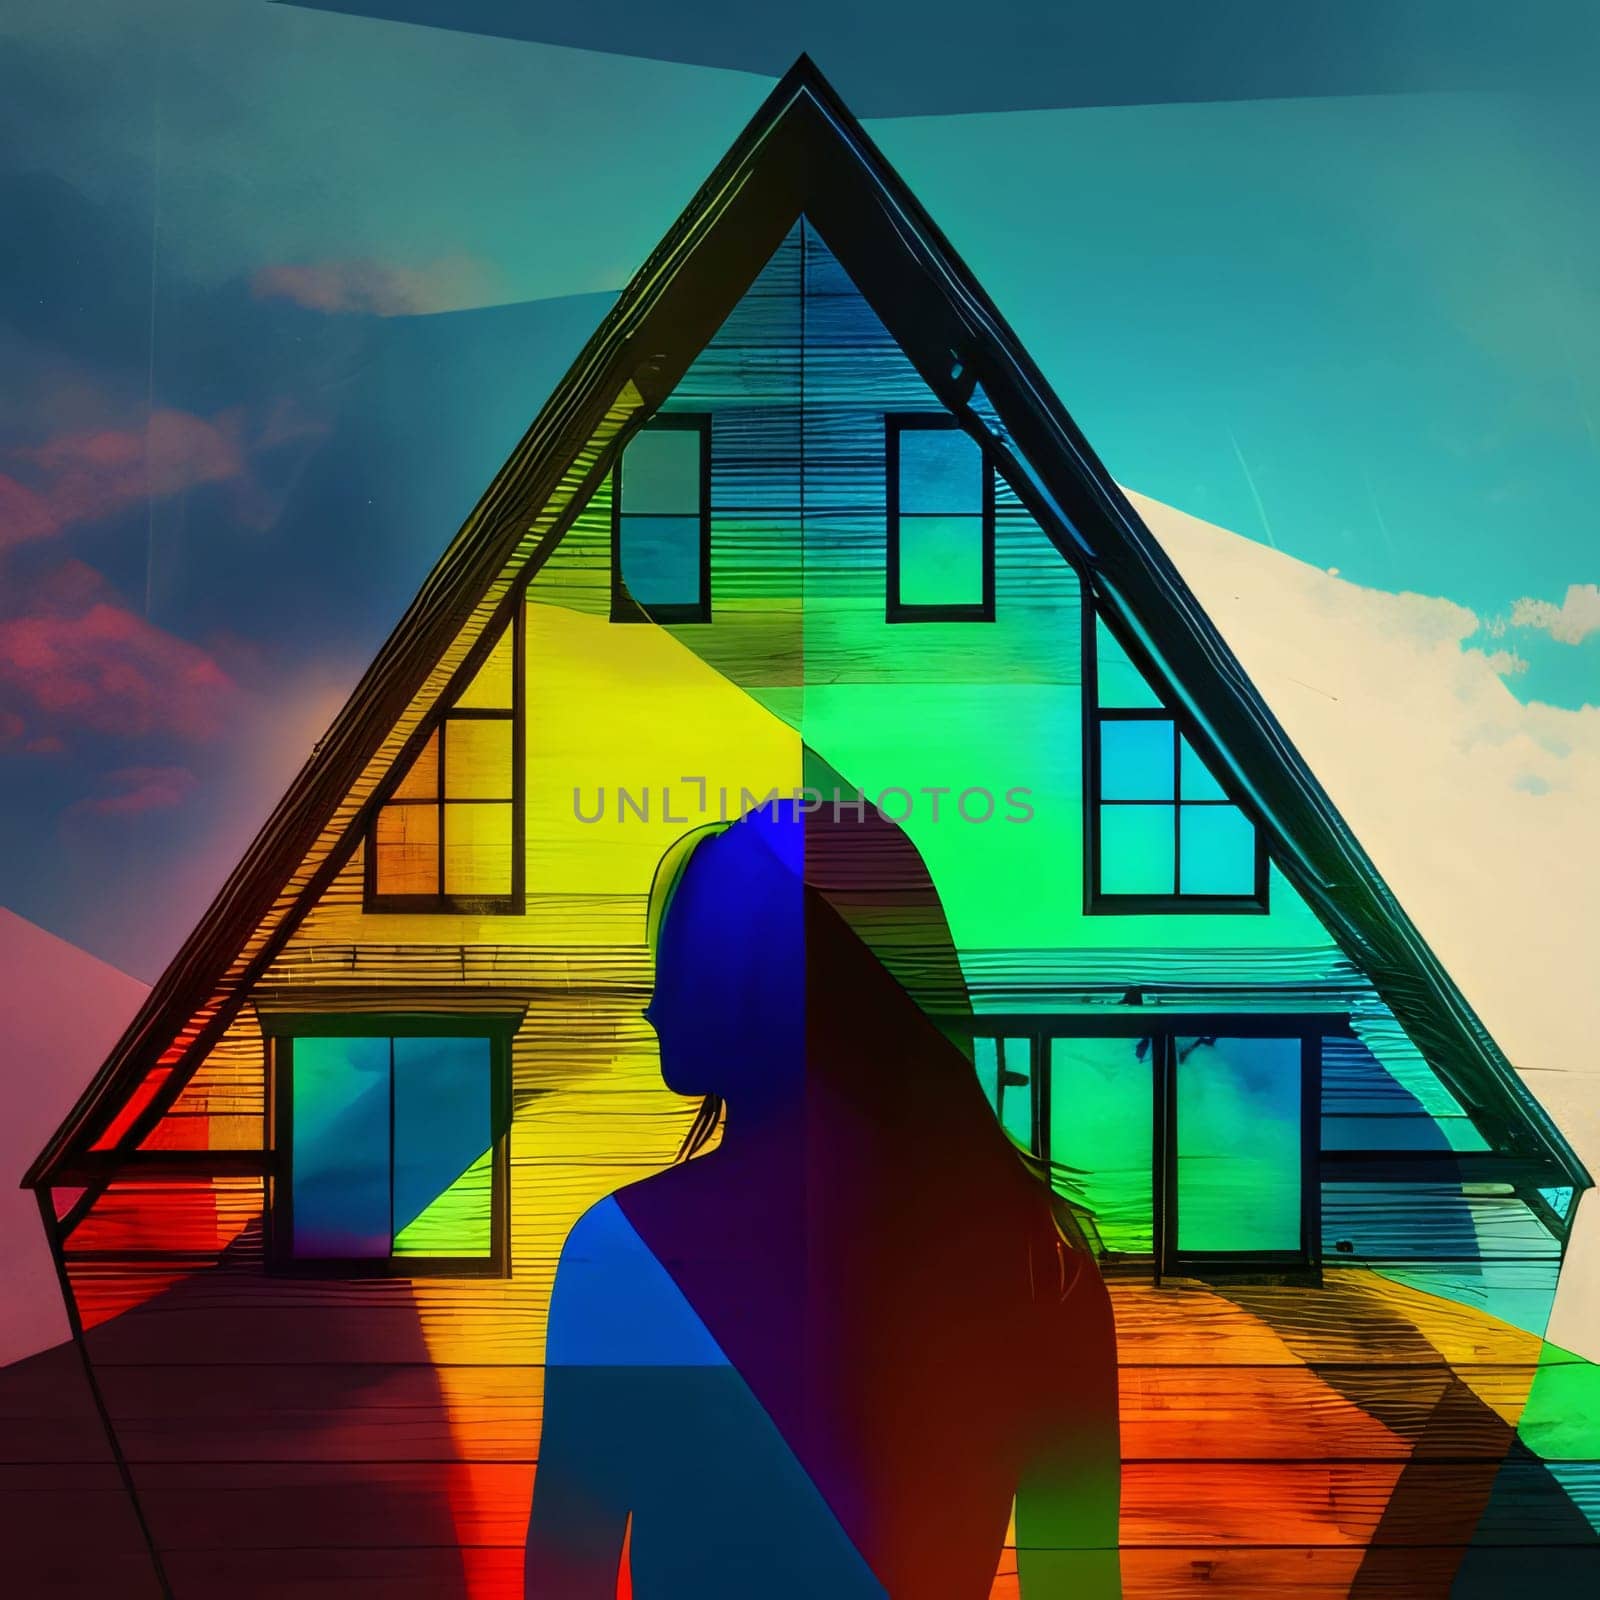 Abstract illustration, house with triangular roof and silhouette of Woman. Symbol of women's freedom. by ThemesS